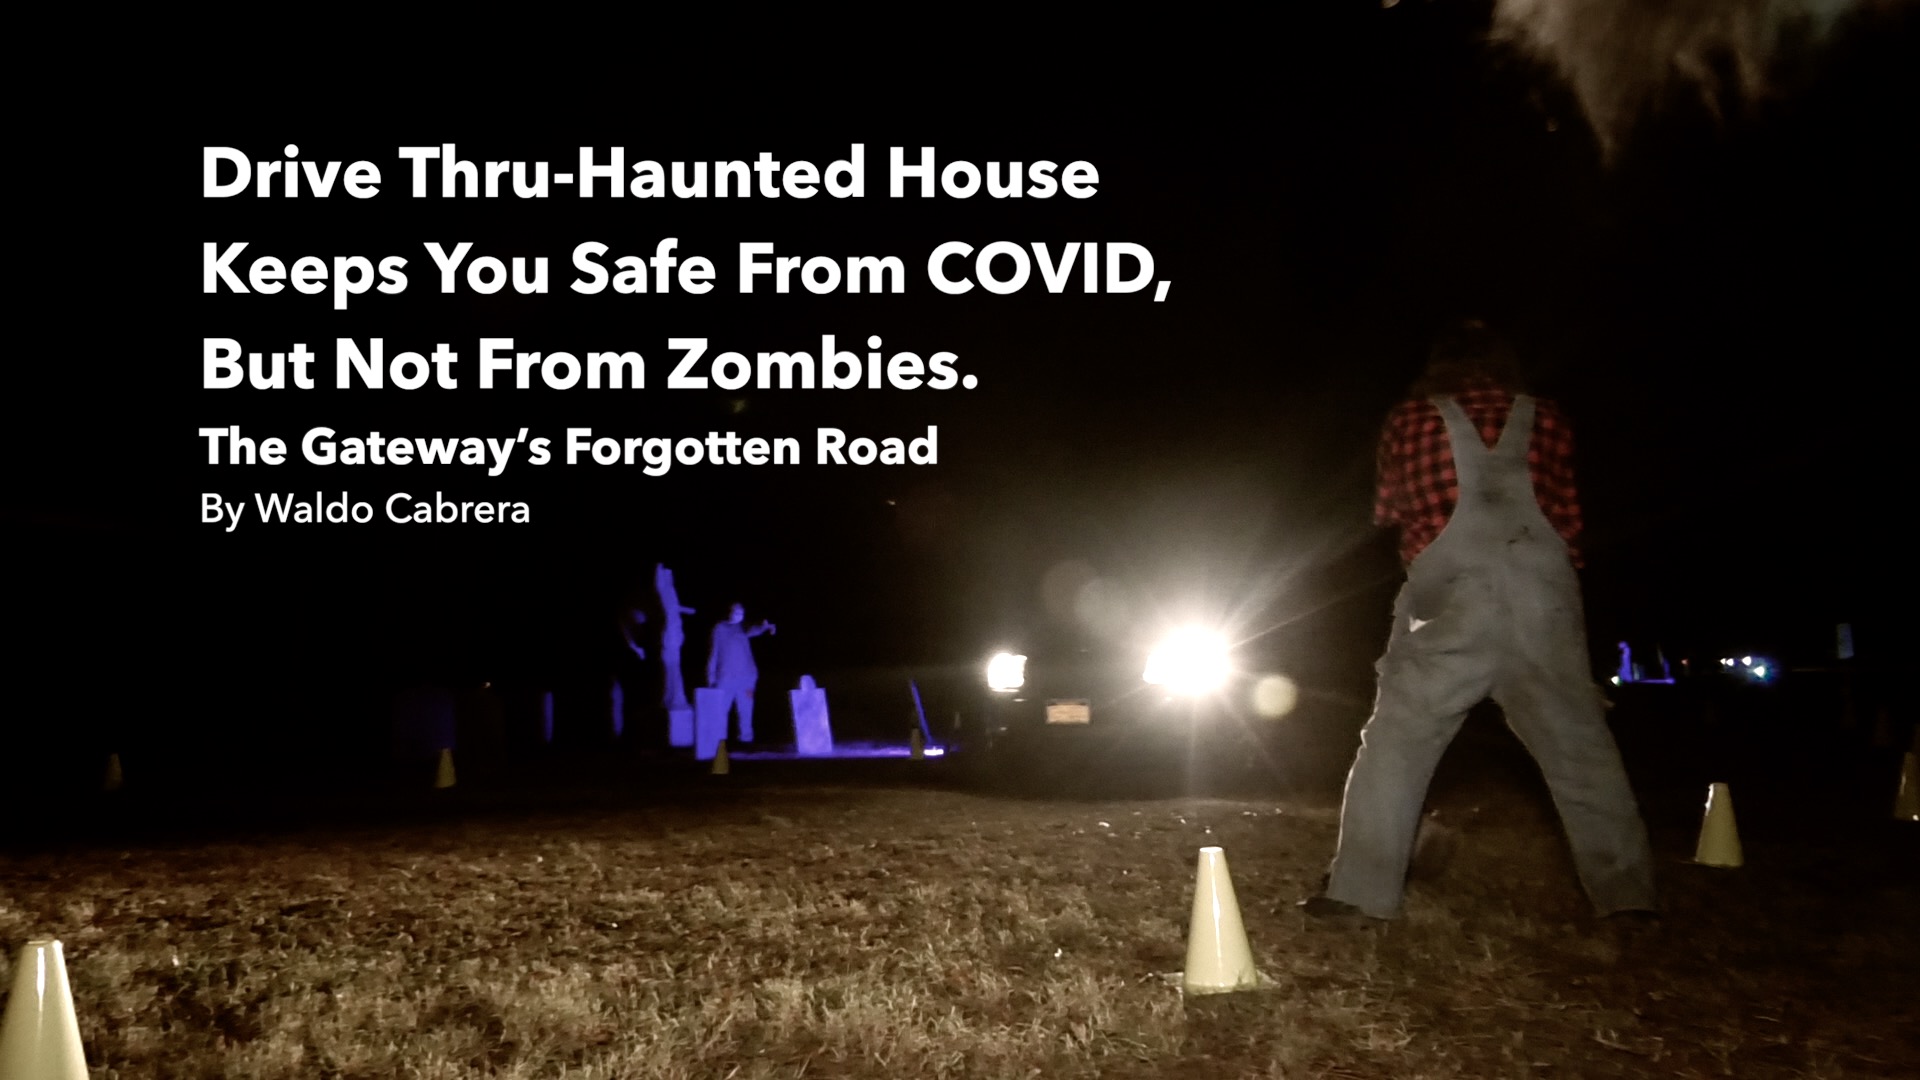 Drive-Thru Haunted House Keeps You Safe From COVID - But Not From ZOMBIES!